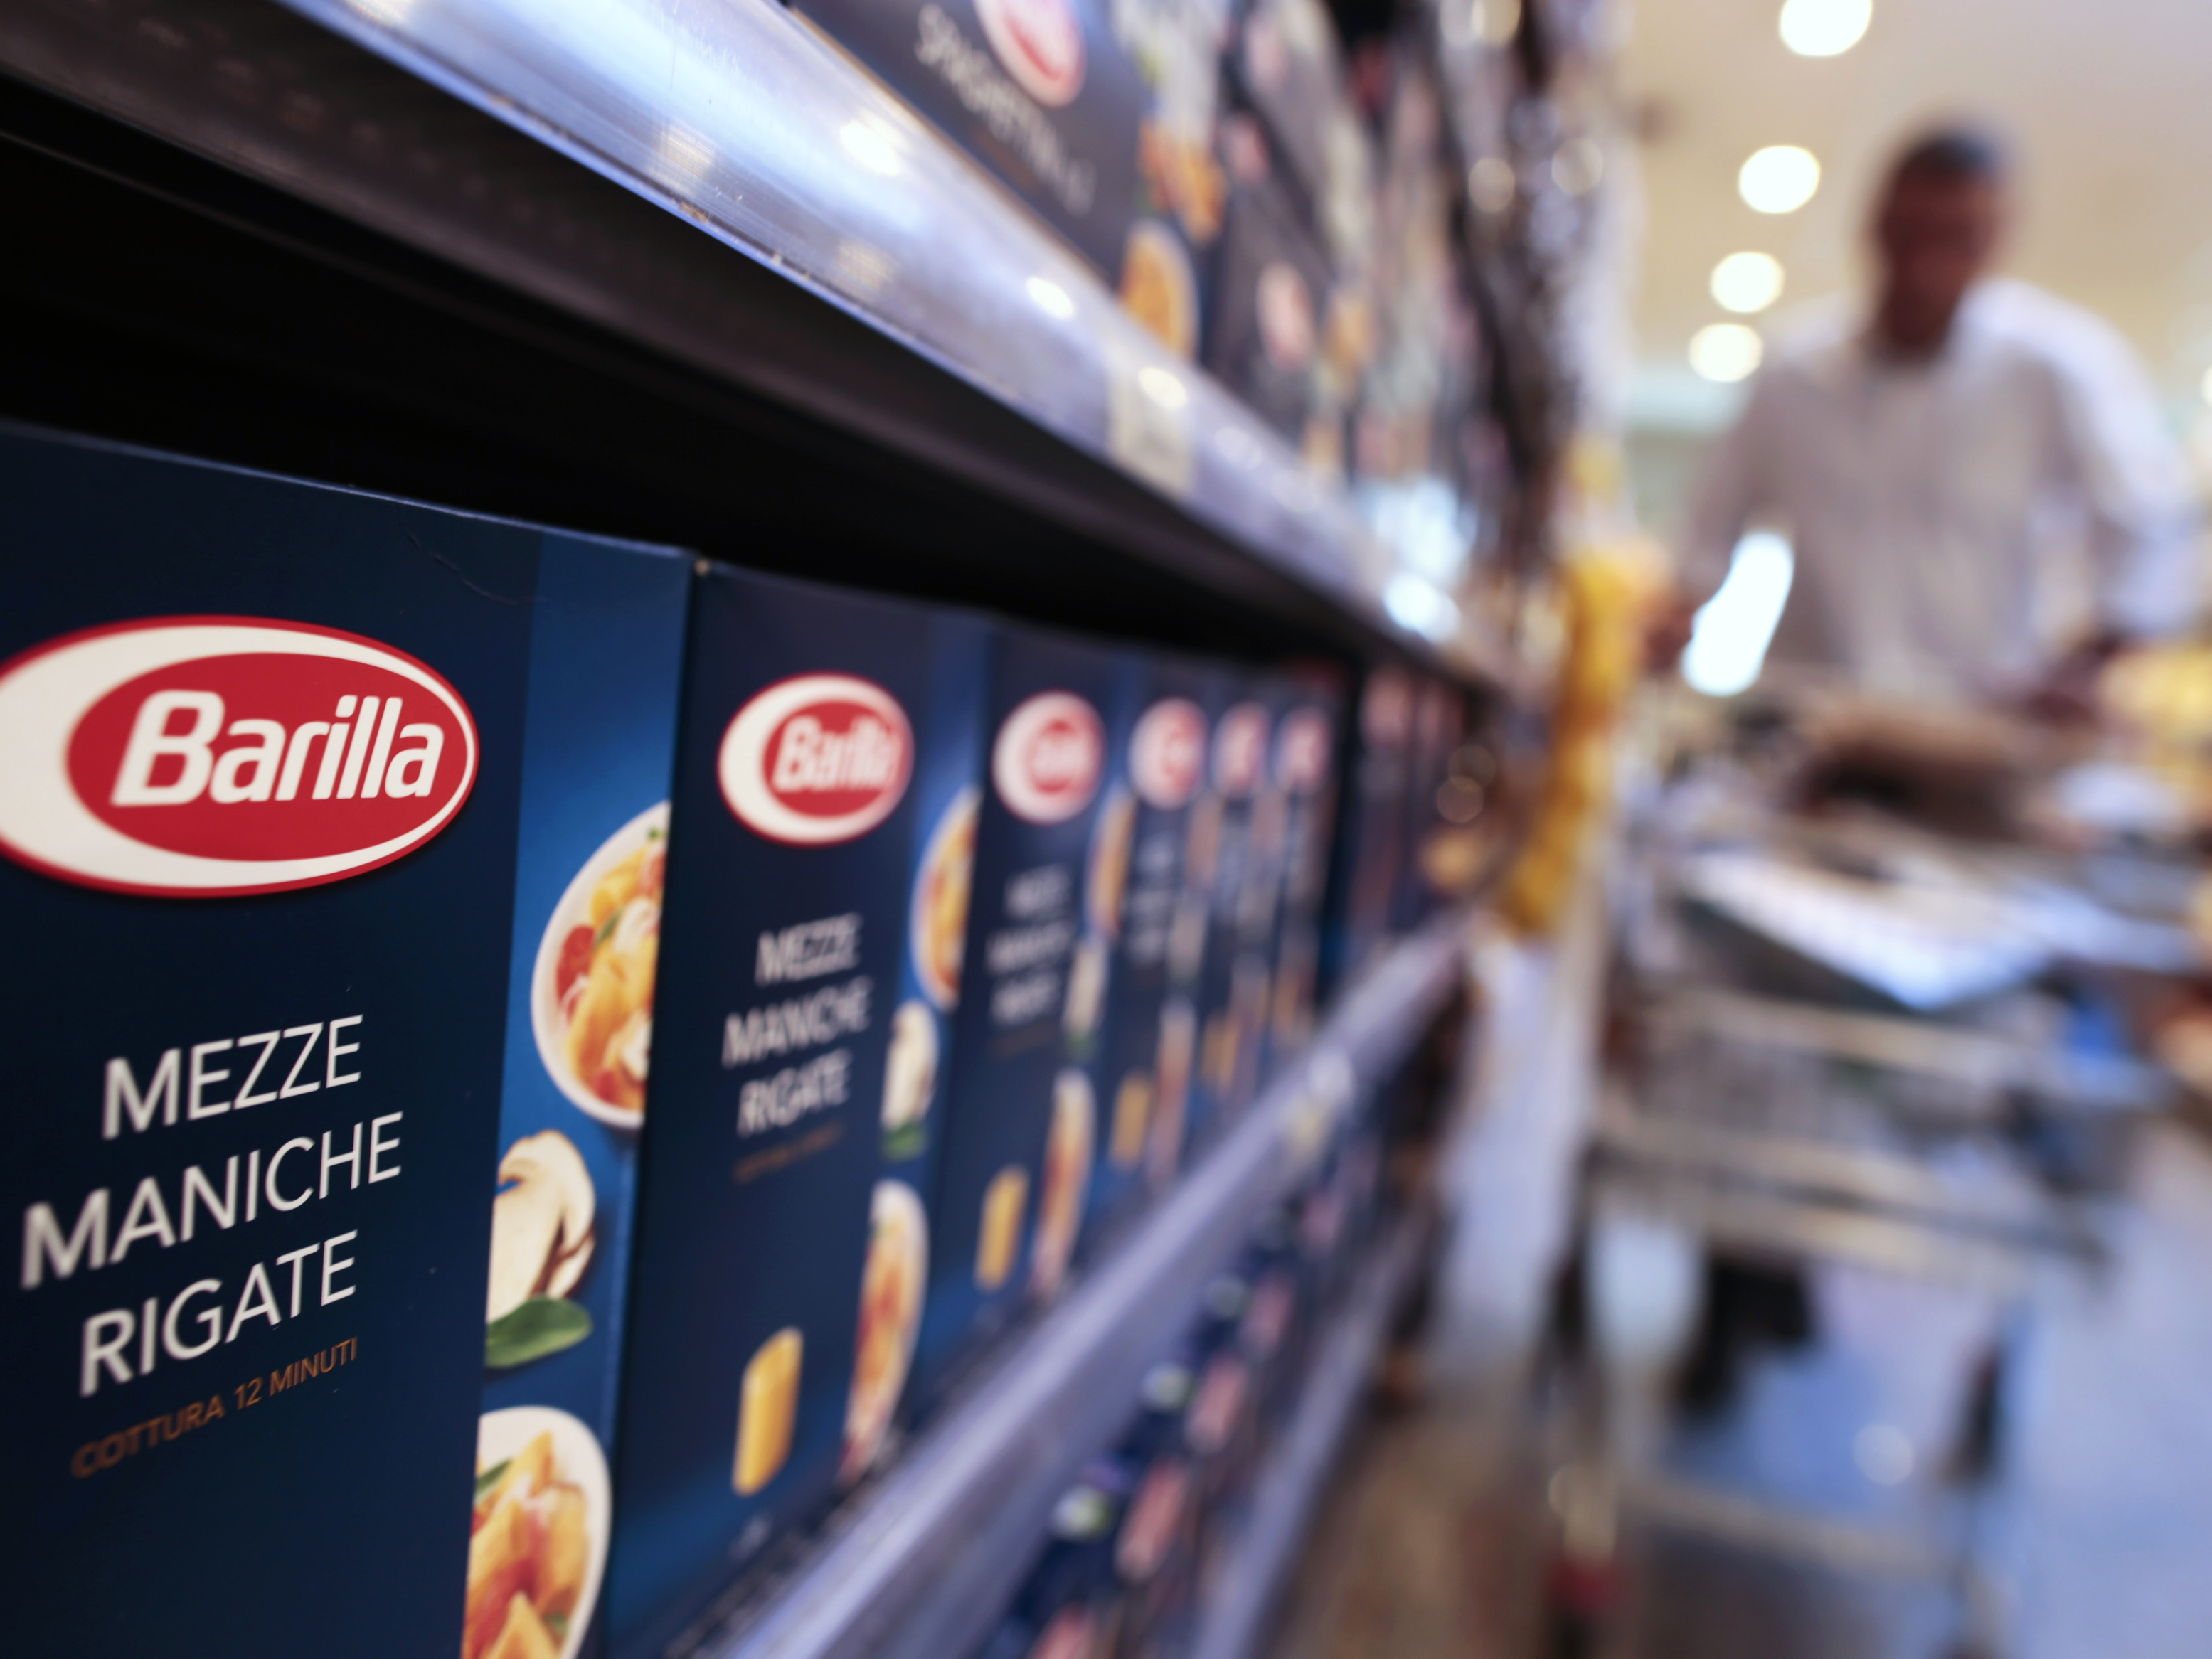 Pasta Barilla boycotted after CEO's 'homophobic' remarks